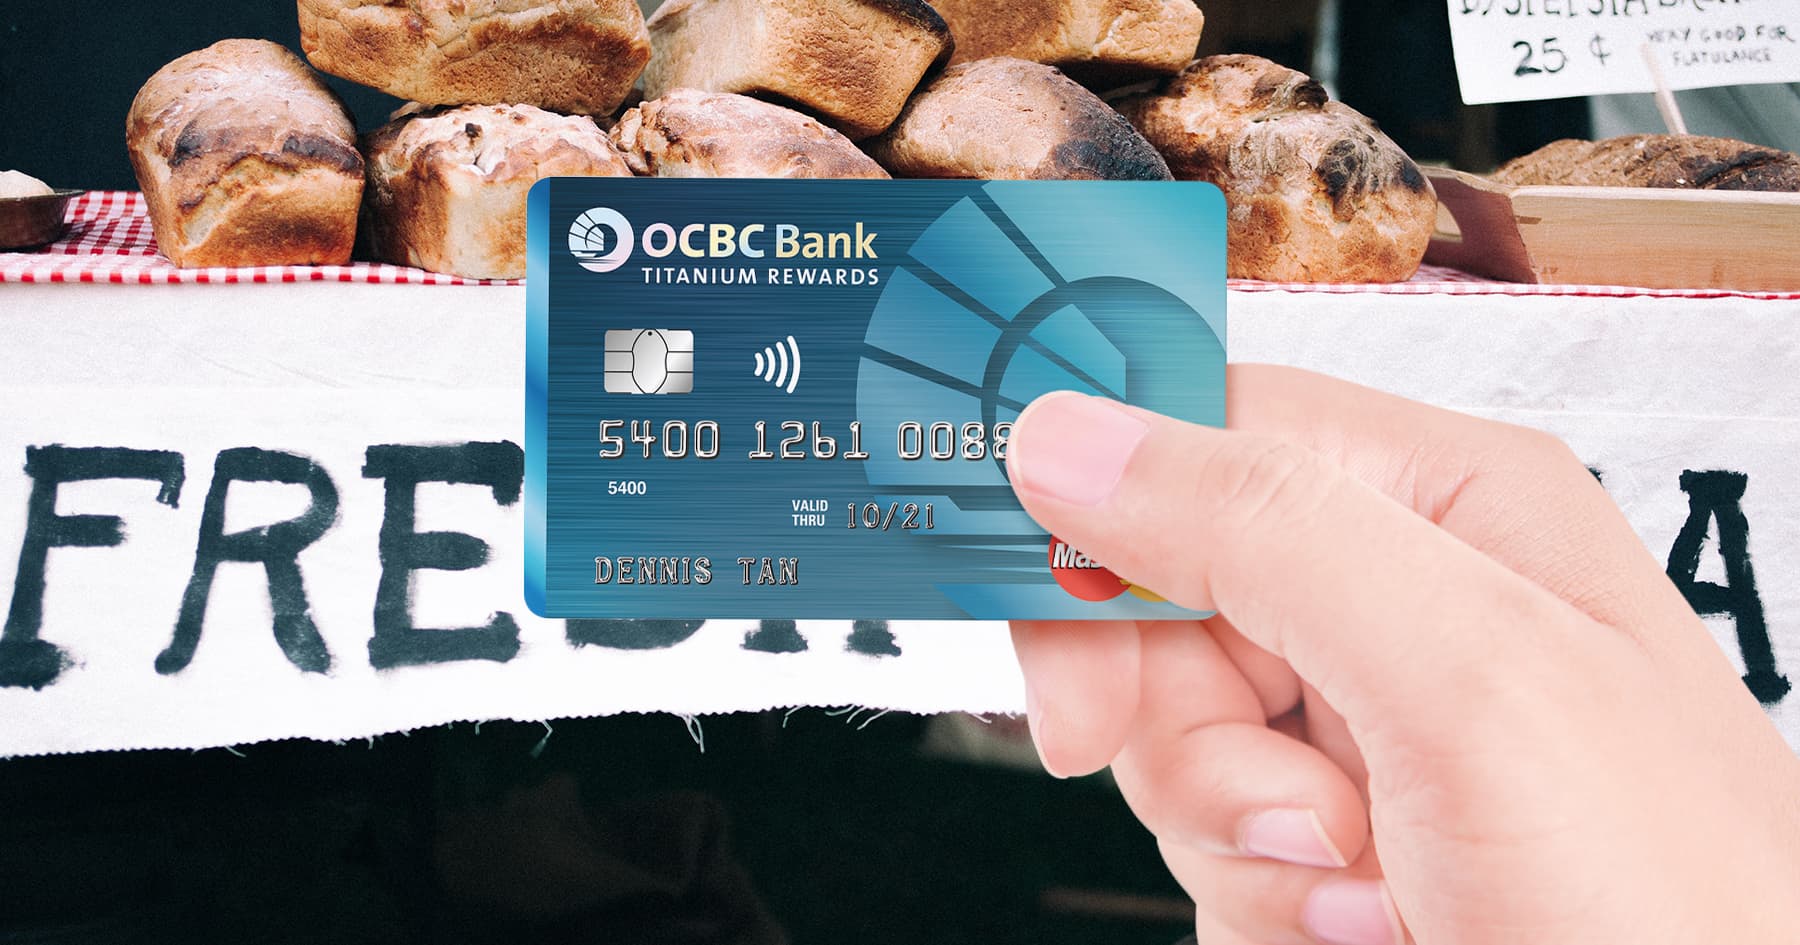 Important Facts About OCBC Credit Cards